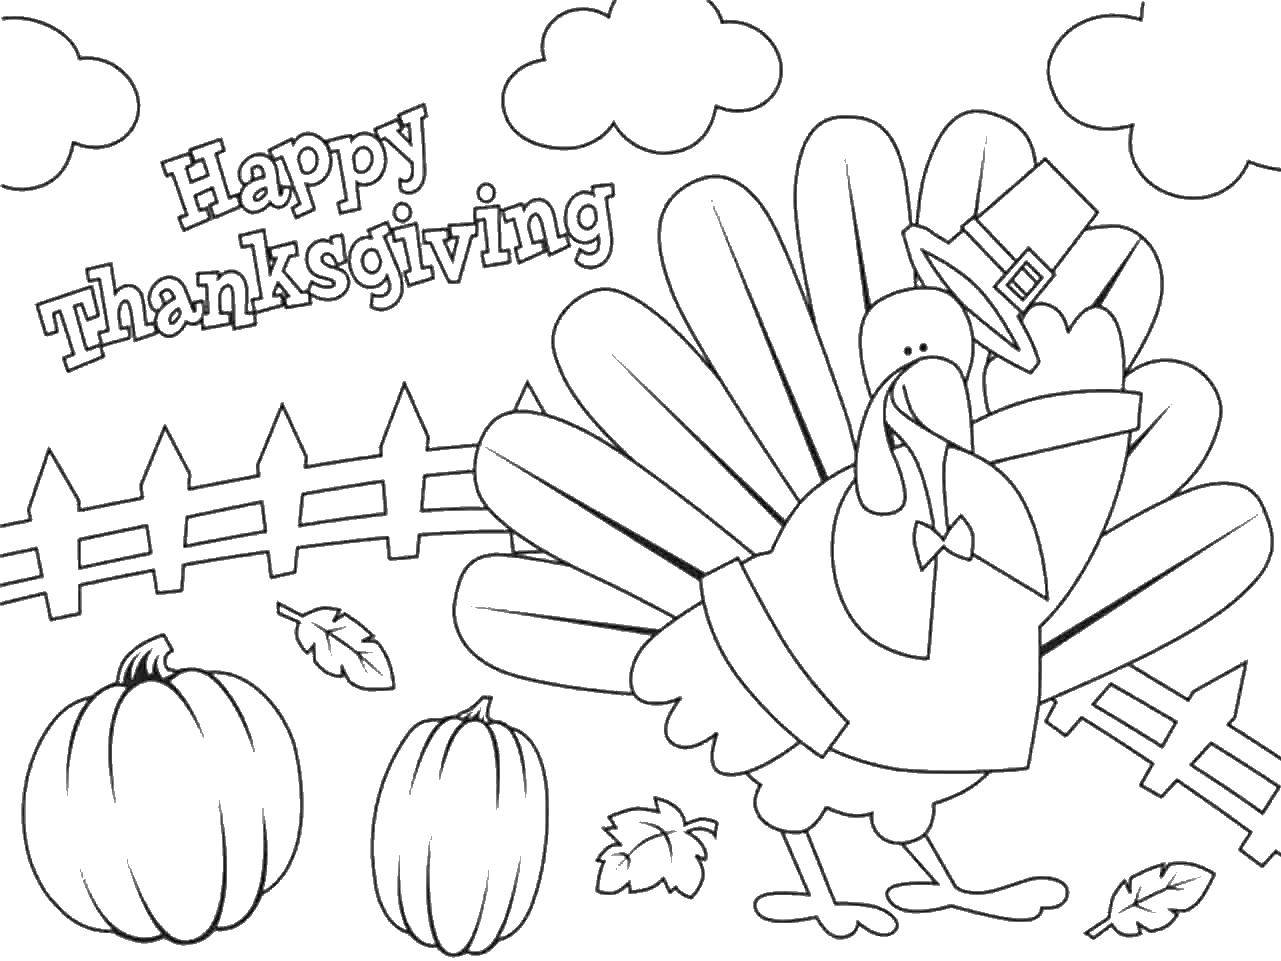 Coloring Thanksgiving. Category holiday. Tags:  holiday, Thanksgiving.